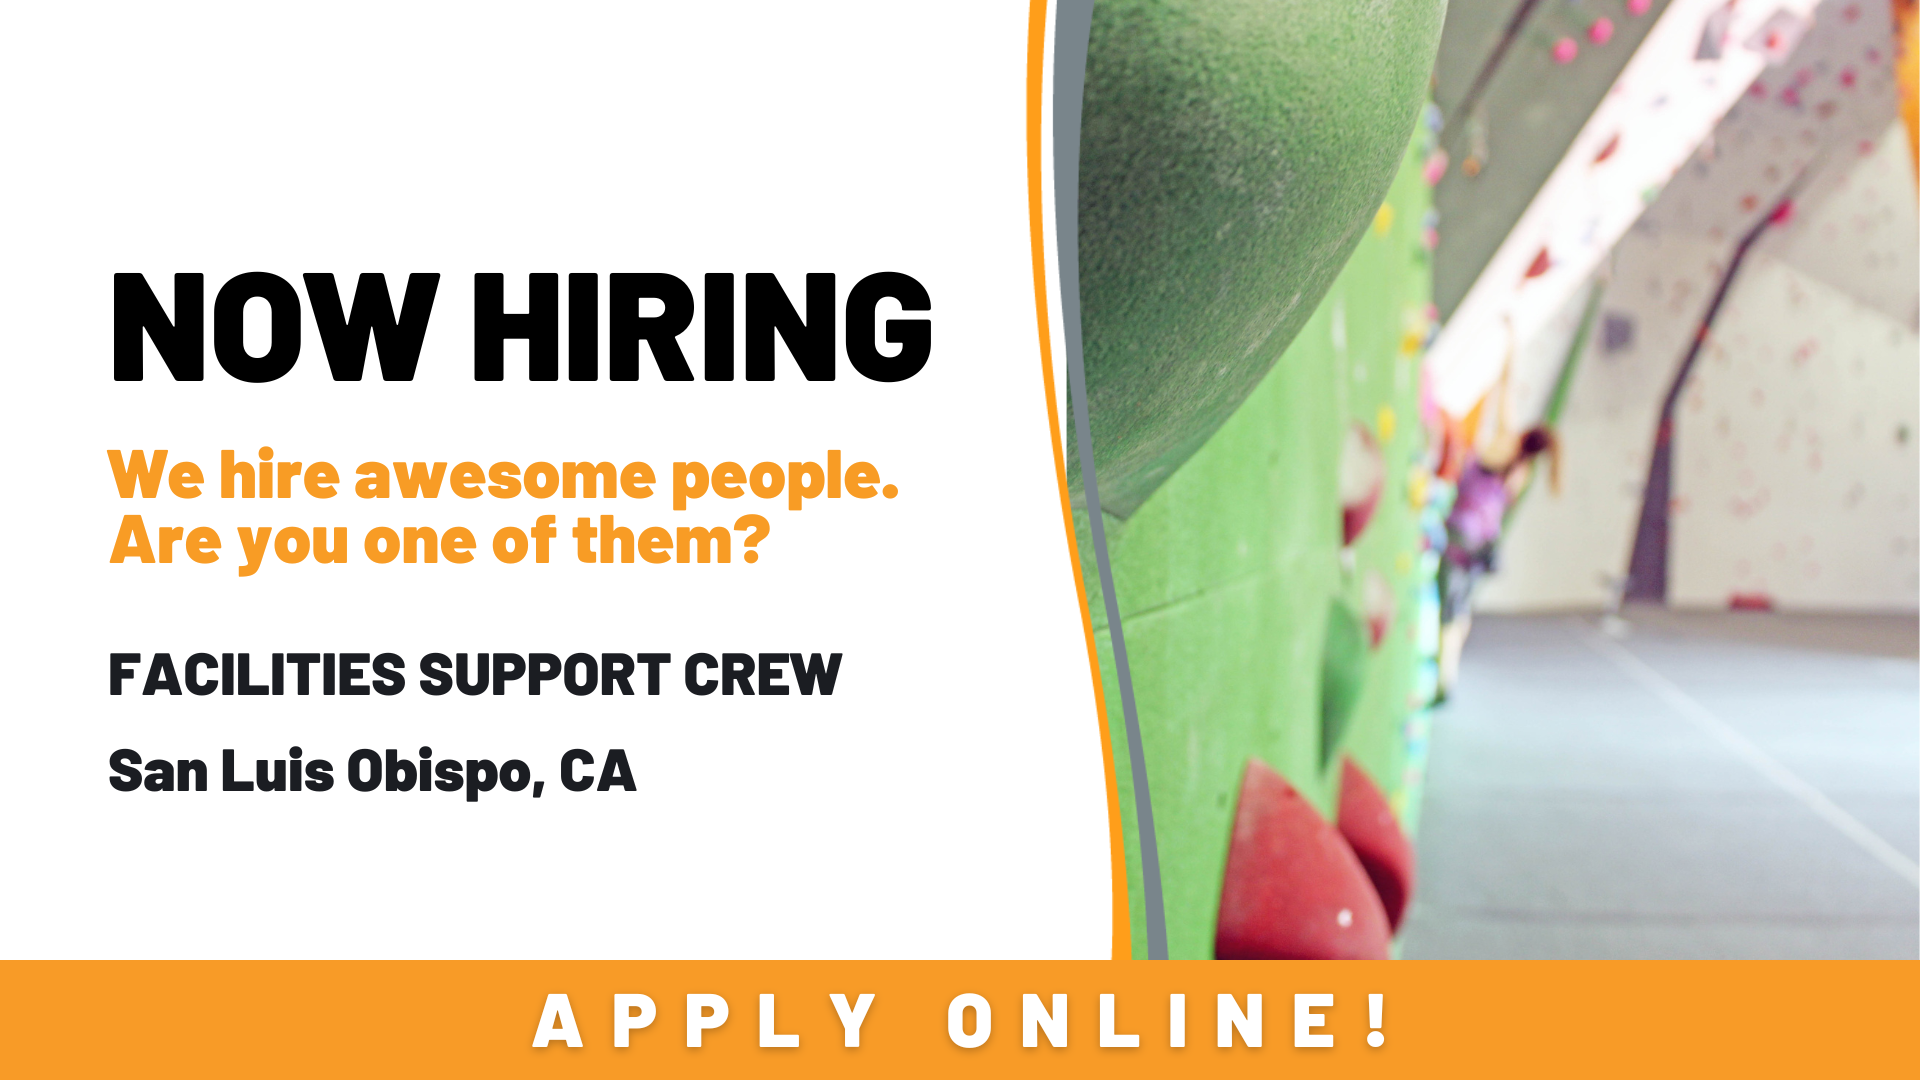 HELP WANTED NOW HIRING FACILITIES SUPPORT CREW